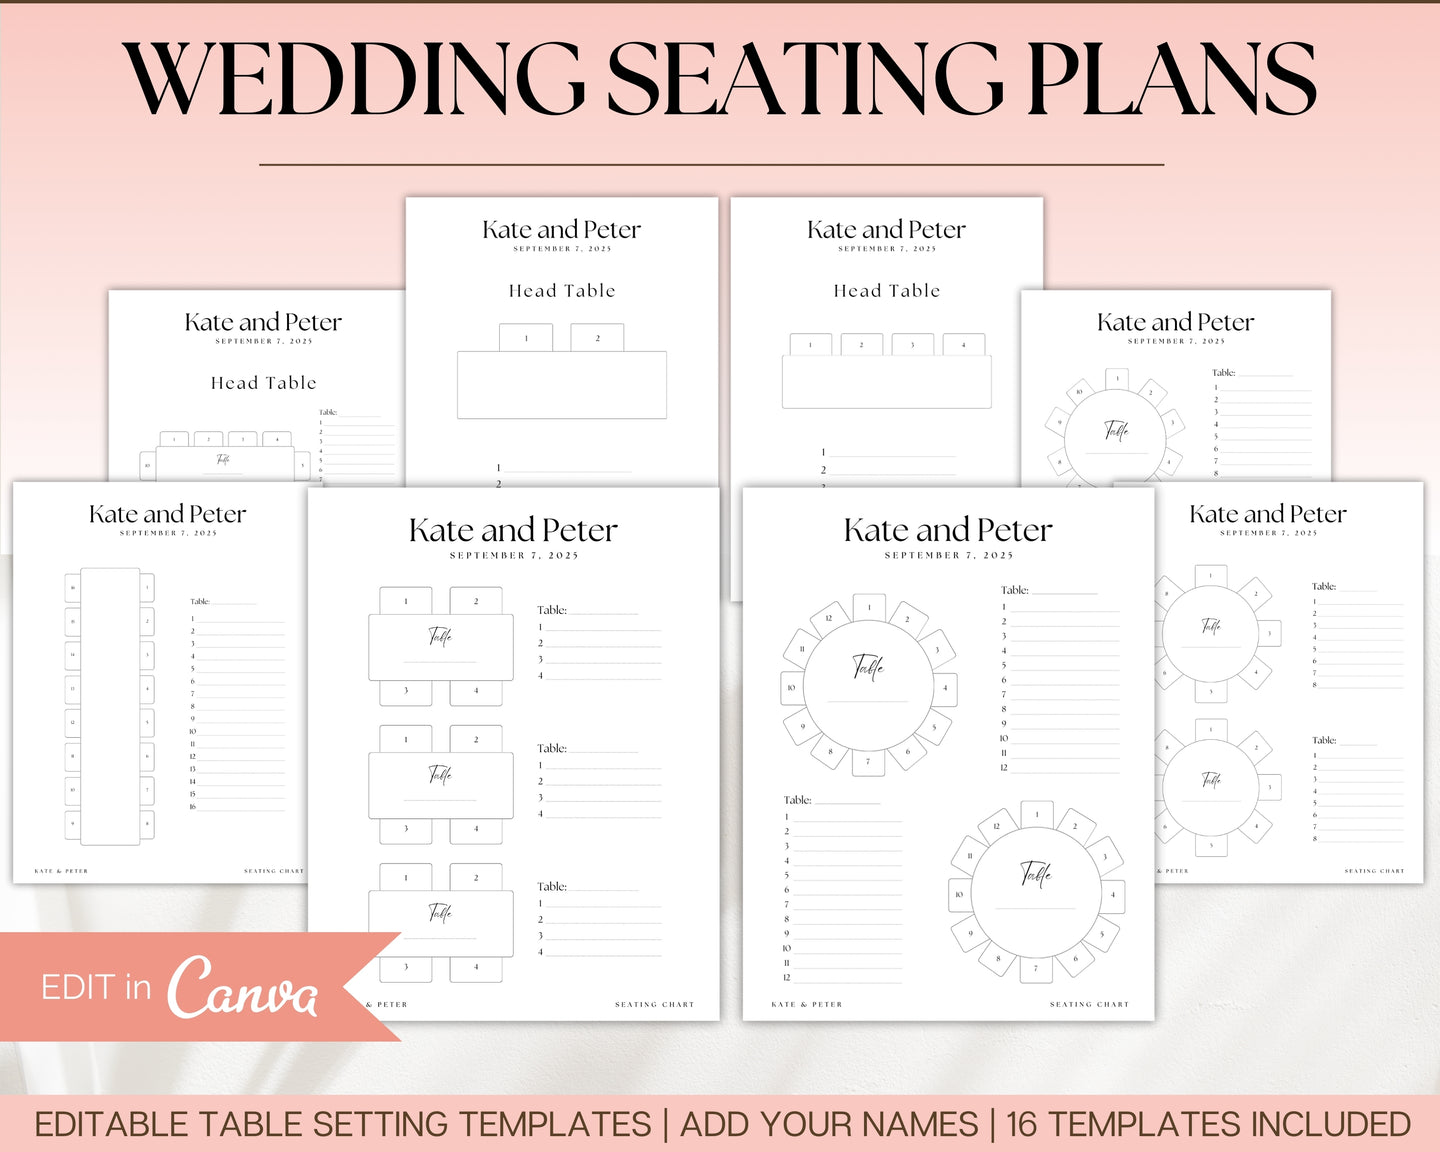 EDITABLE Wedding Seating Chart Templates | Round & Rectangle Tables, Head Table, Seating Arrangement, Wedding Planner & Seat Map for Reception